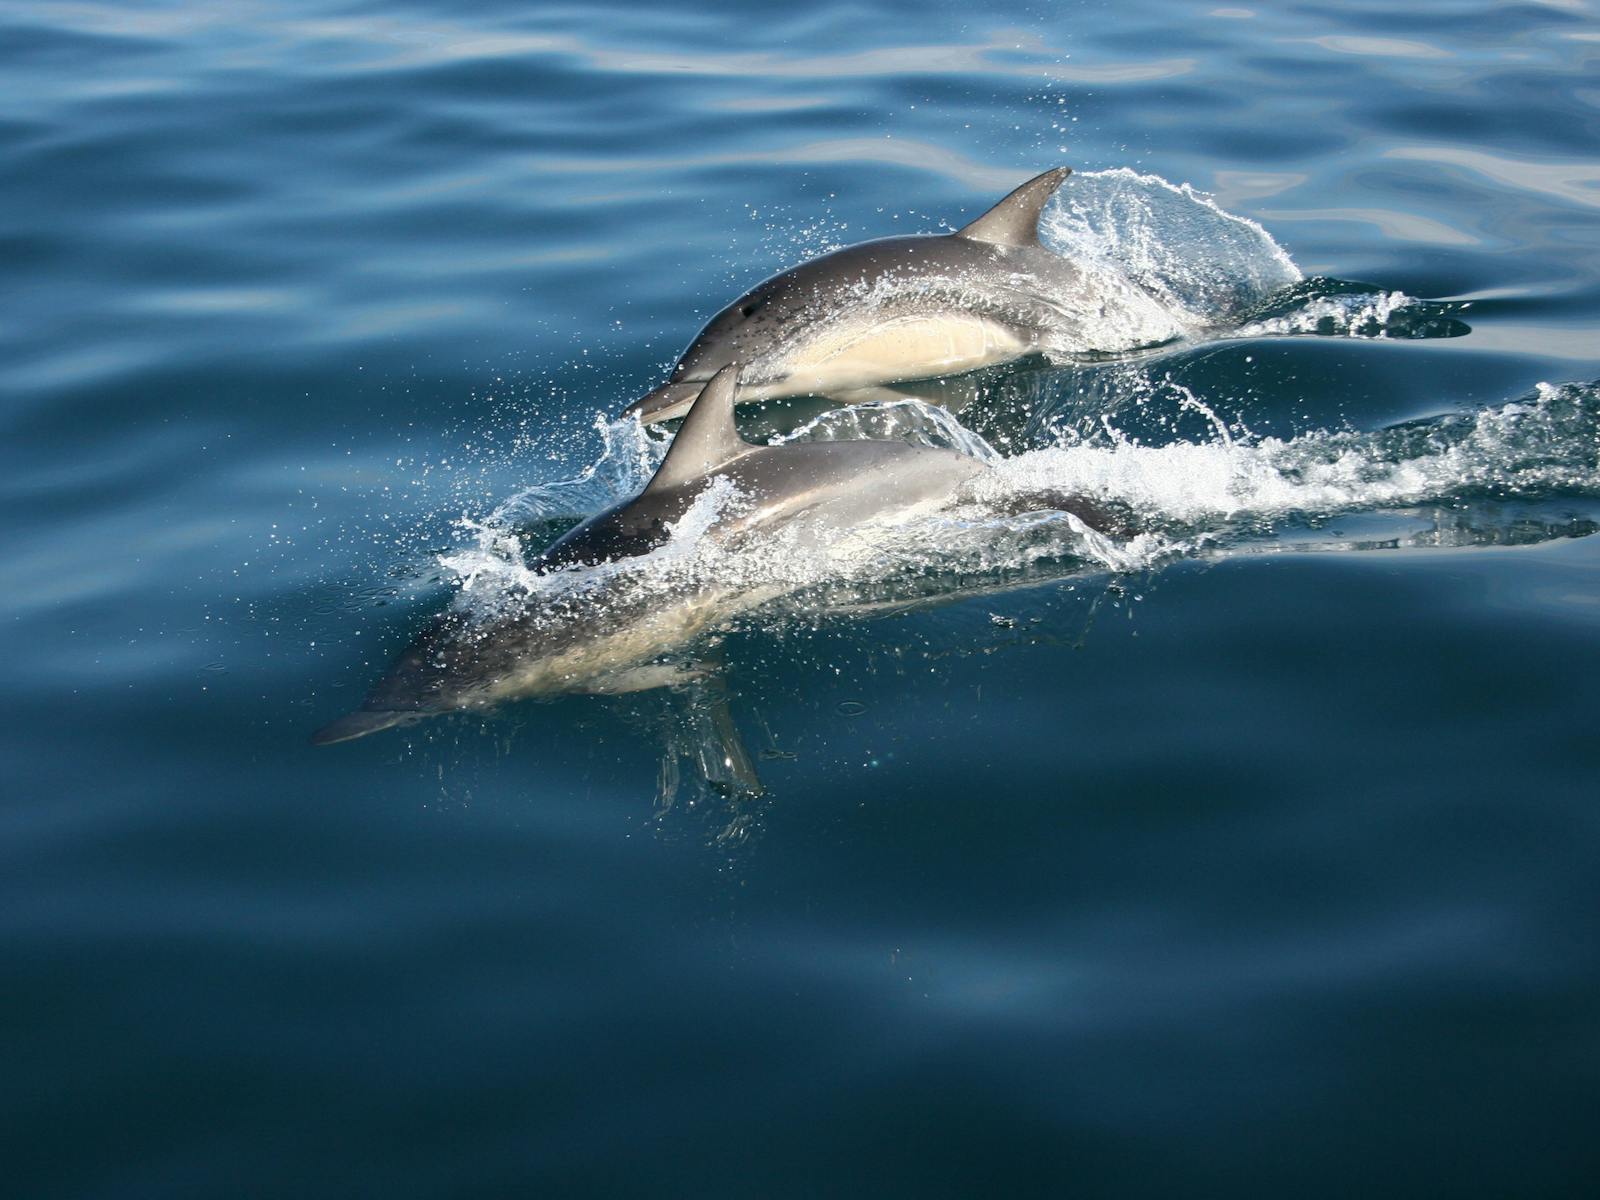 Dolphins are some of the friendly locals we see.